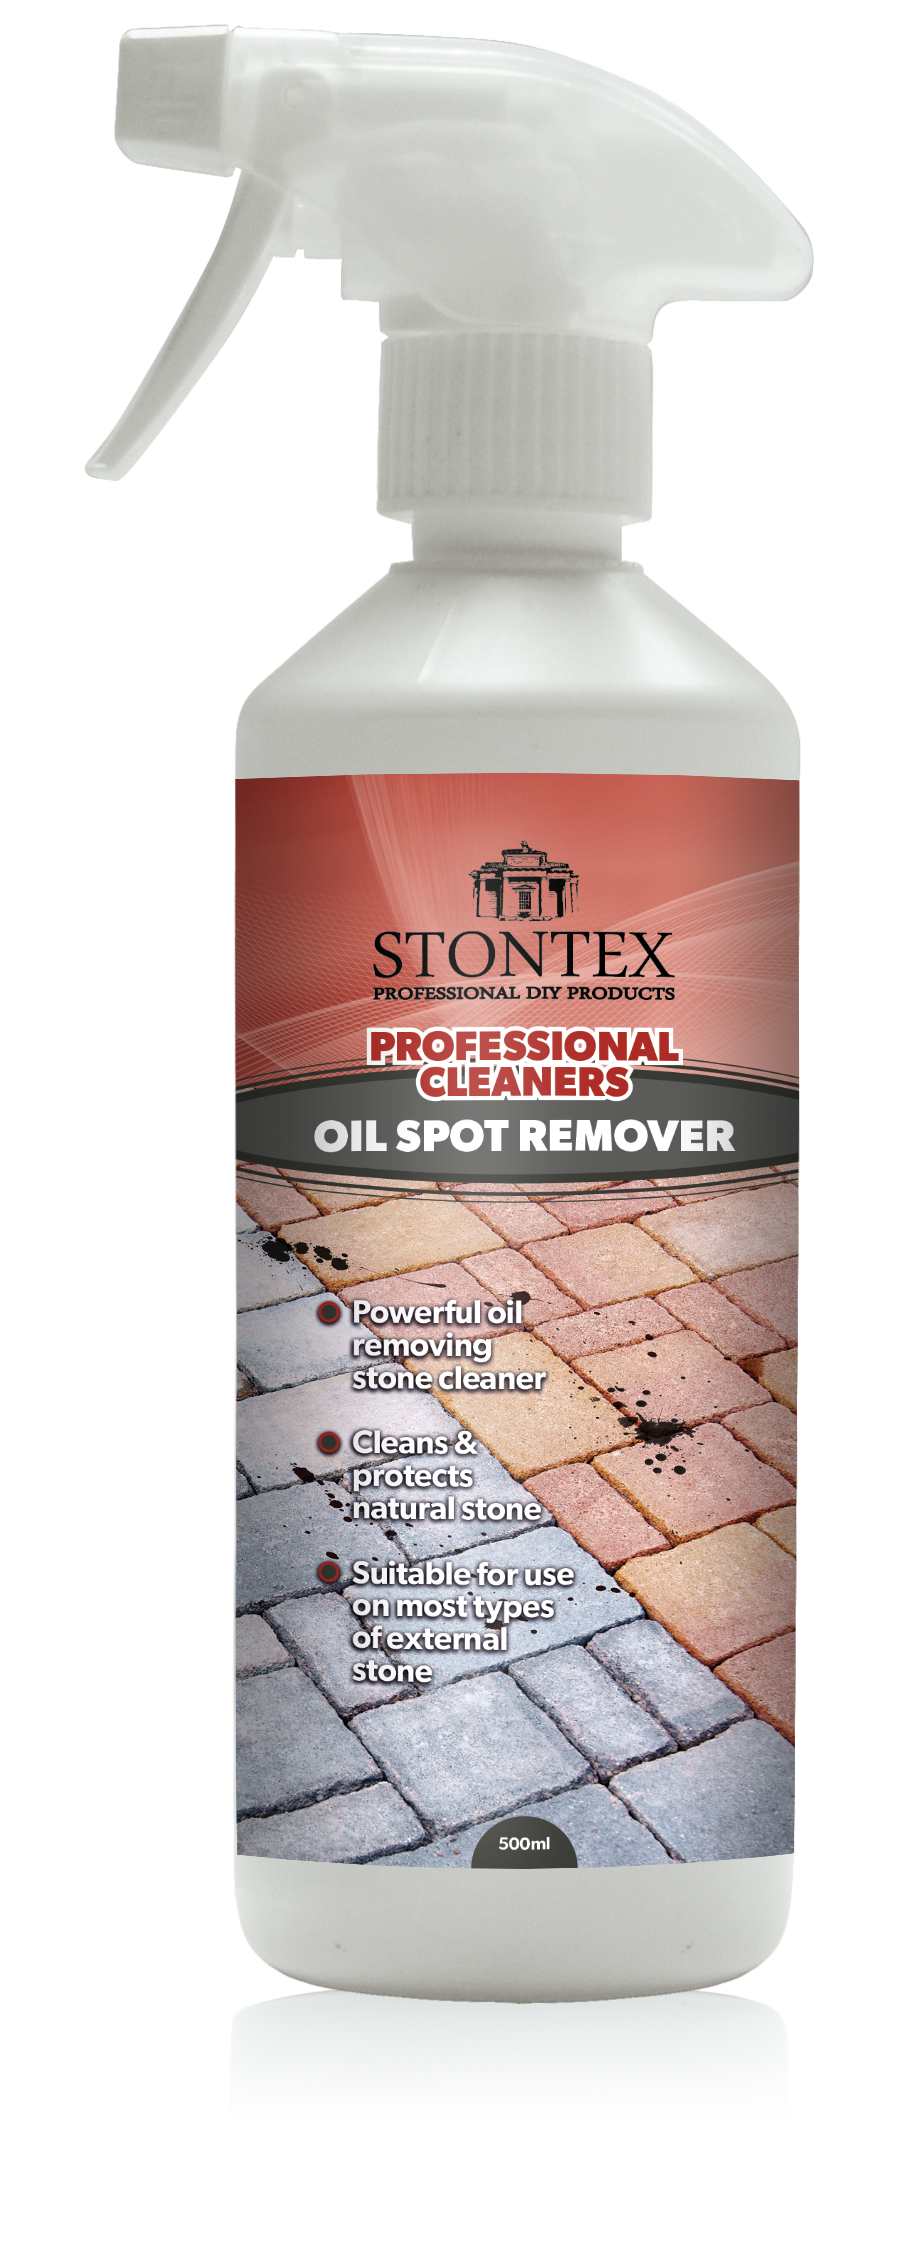 Stontex oil spot_stains_remover_from_natural stone_paving